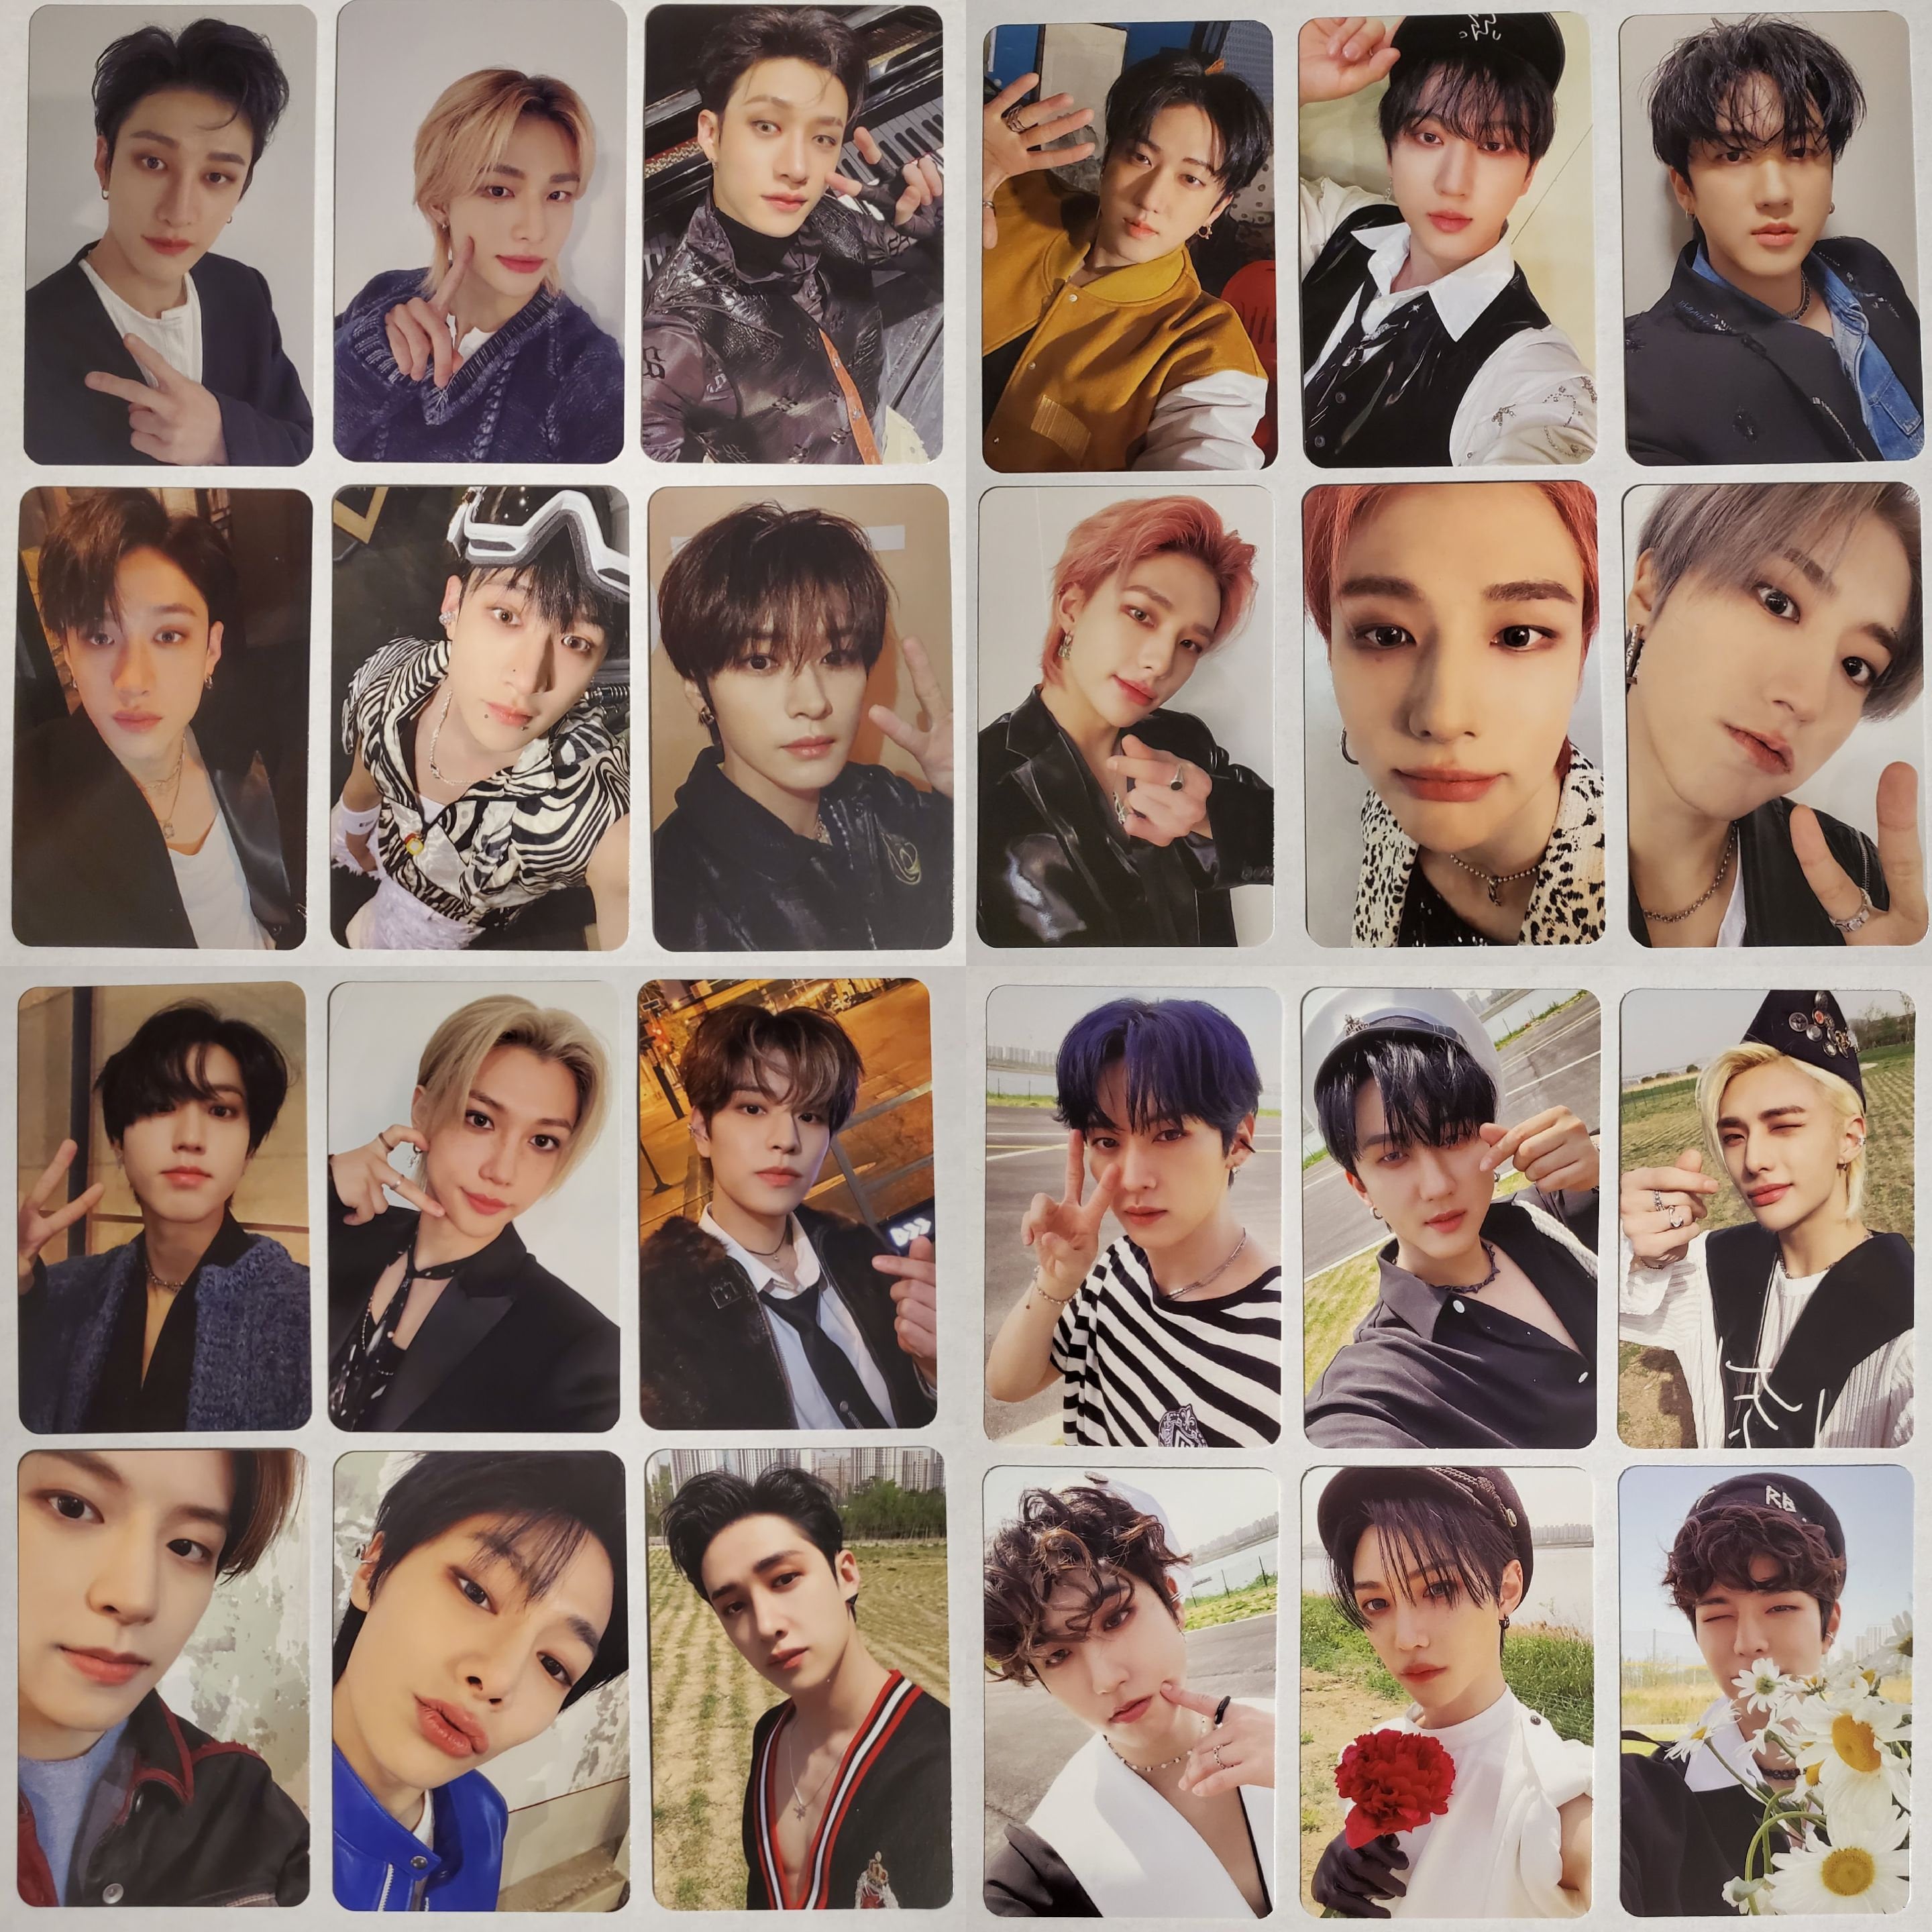 Stray Kids Photocard - Collectibles & Hobbies